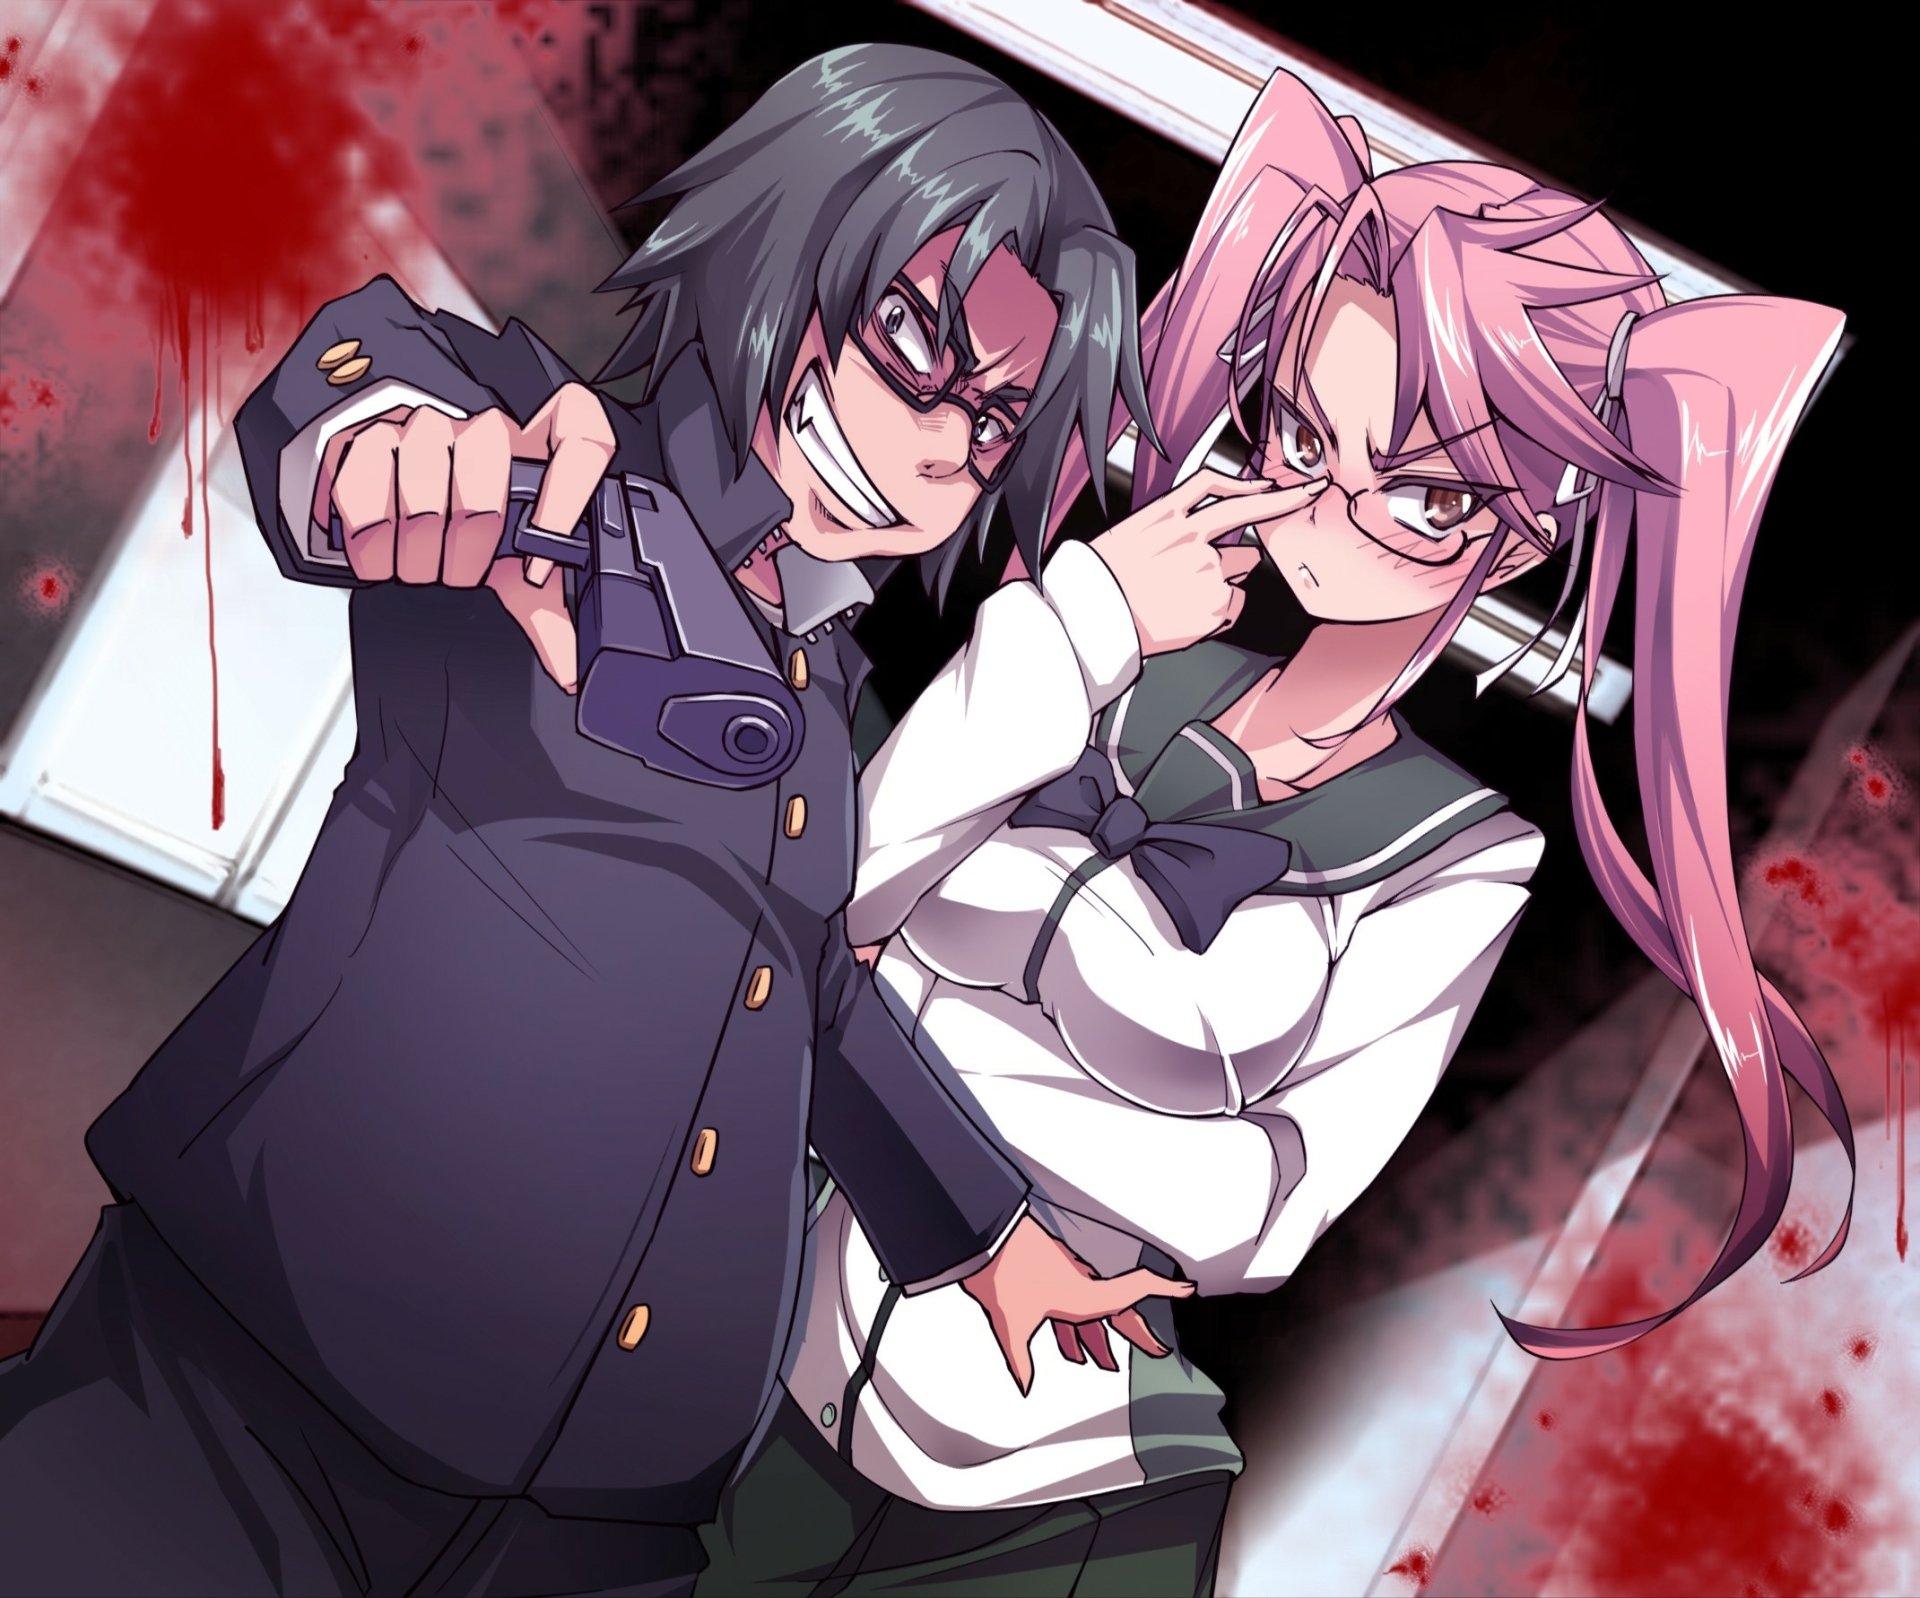 highschool of the dead characters